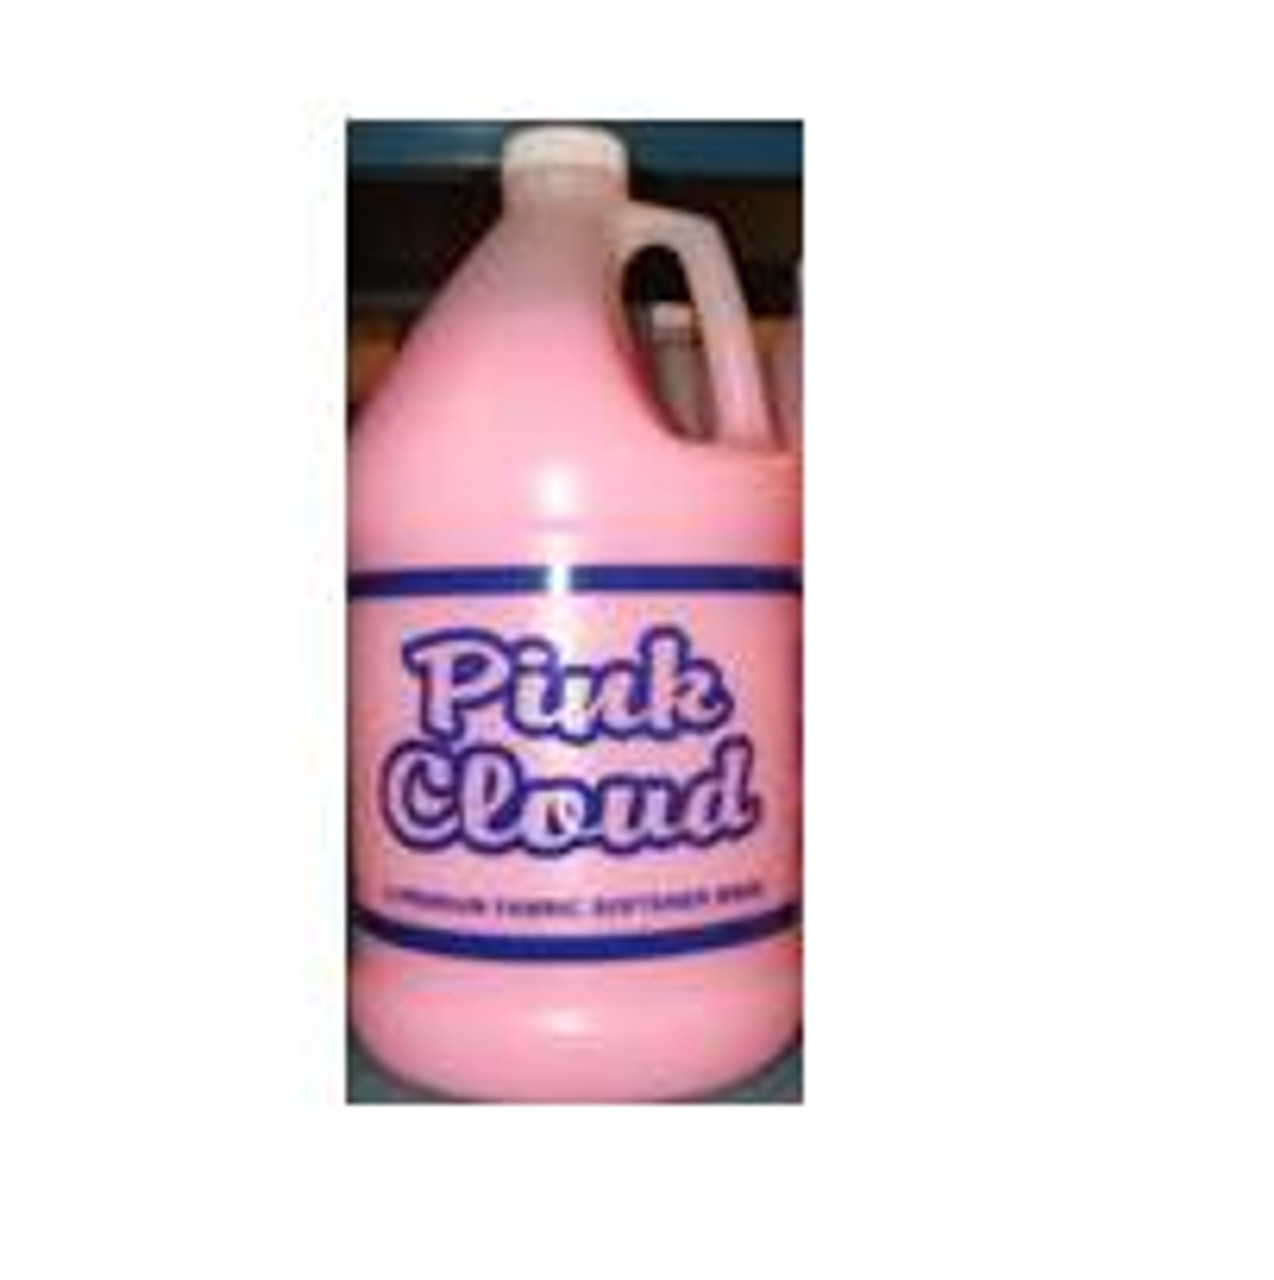 Pink Cloud Fabric Softener 1-Gallon Jugs |By the Pallet|